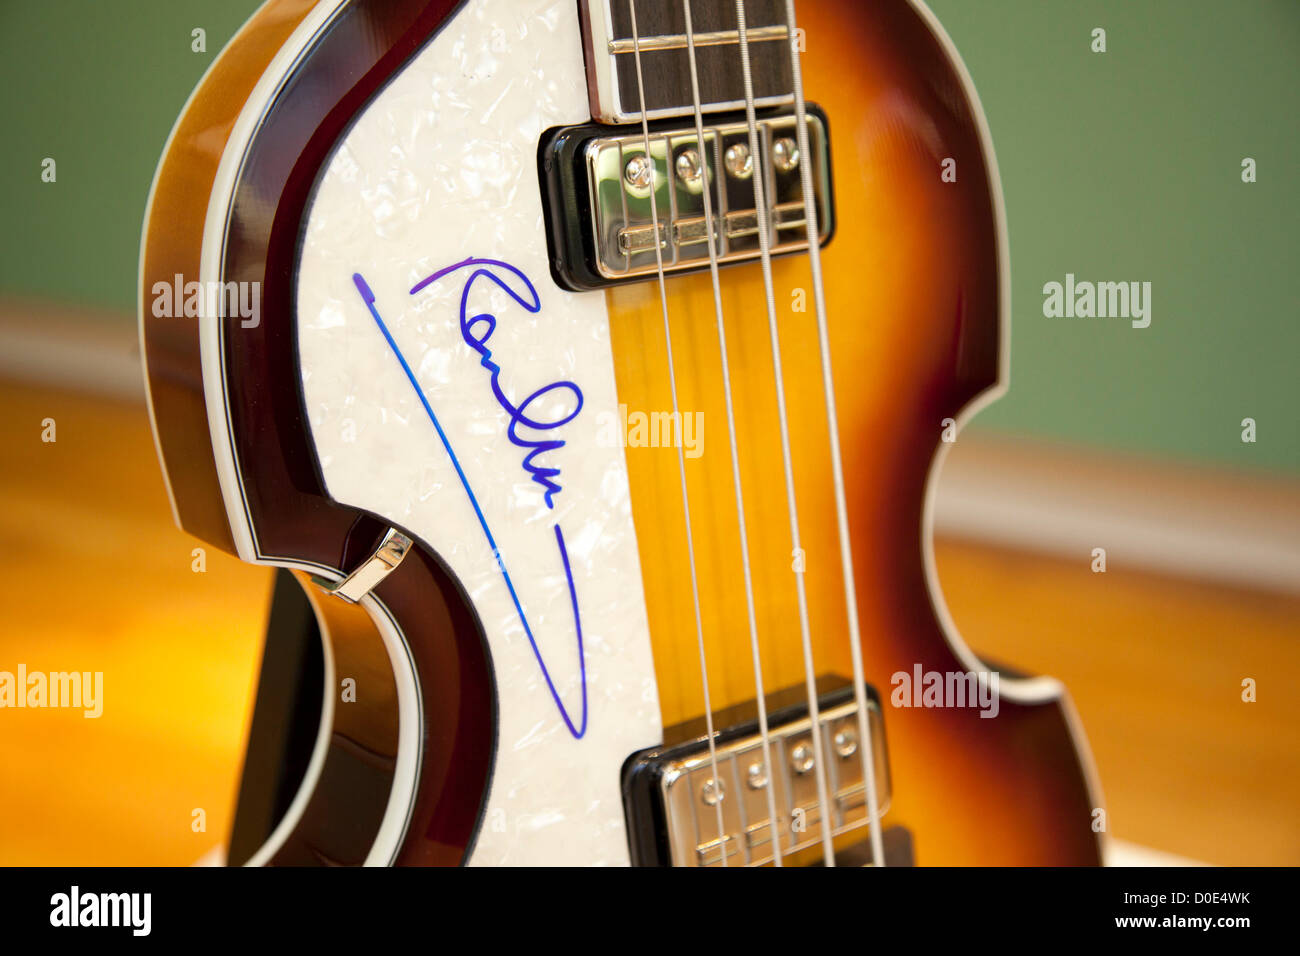 London, UK. Friday 23rd November 2012. Christies auction house showcasing memorabilia from every decade of the past century of popular culture from the industries of film and music. Hofner 500/1 violin bass guitar signed by Paul McCartney. Stock Photo